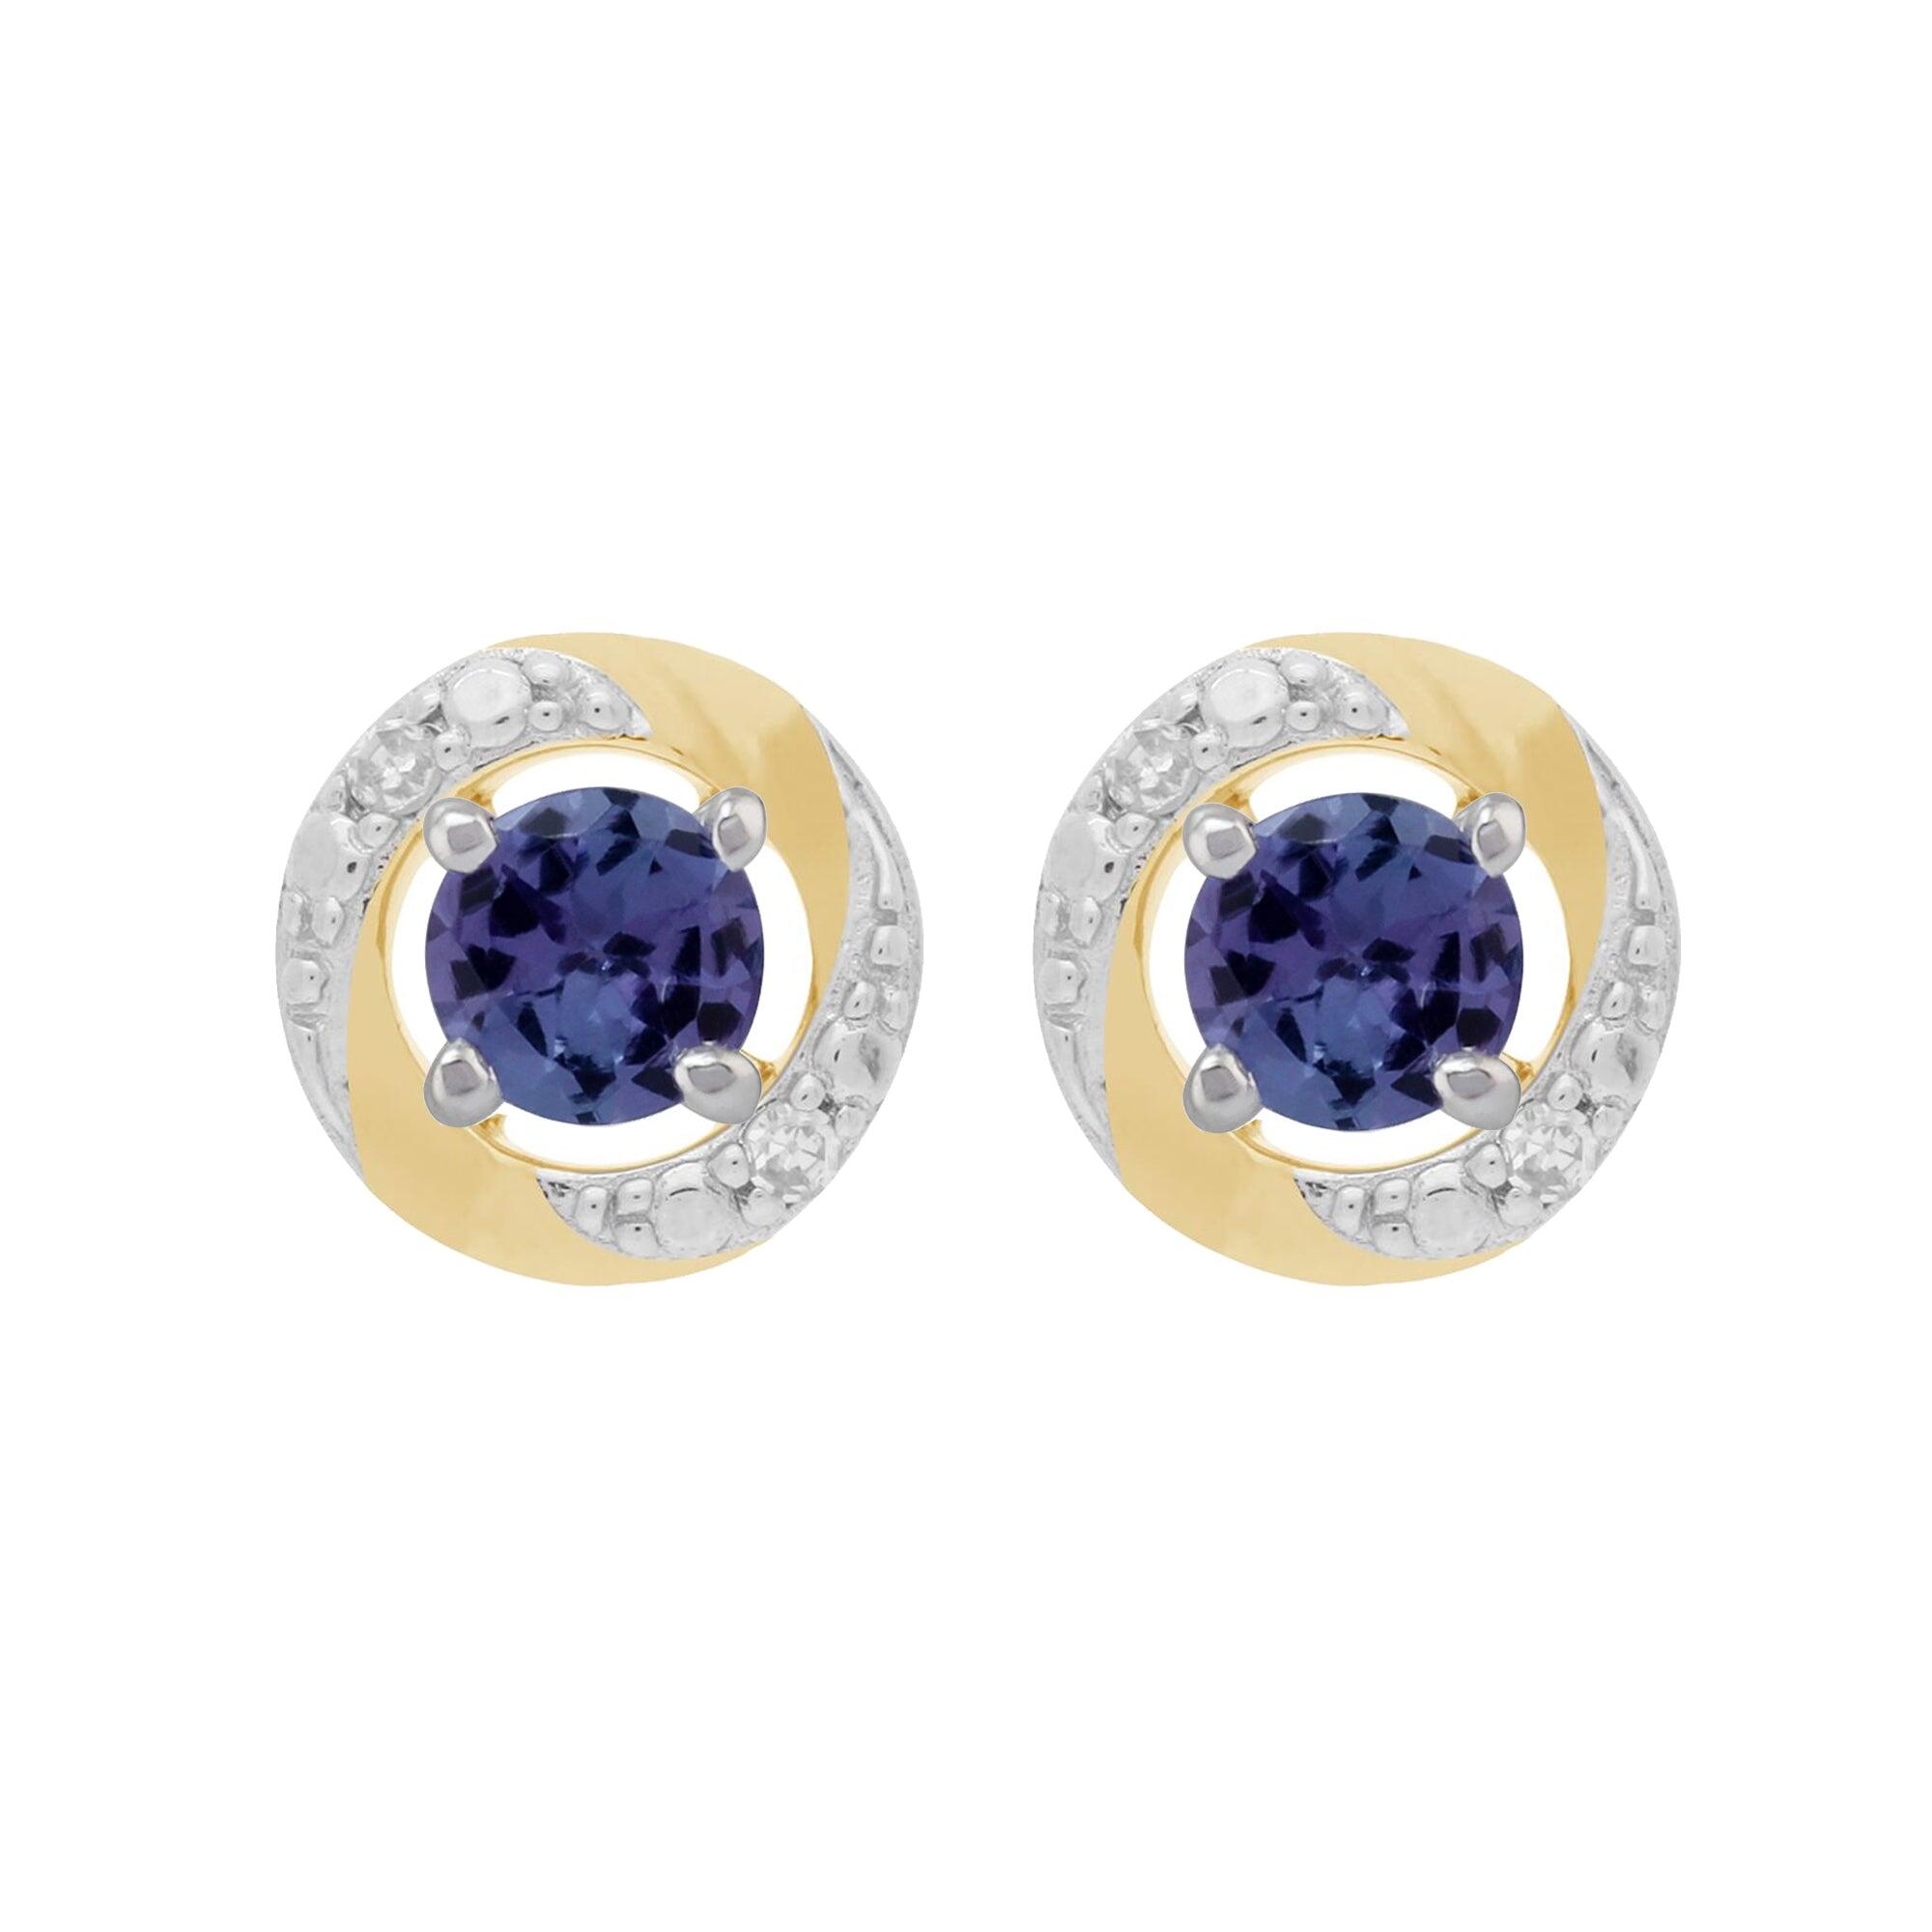 9ct White Gold Tanzanite Stud Earrings with Detachable Diamond Halo Ear Jacket in 9ct Yellow Gold